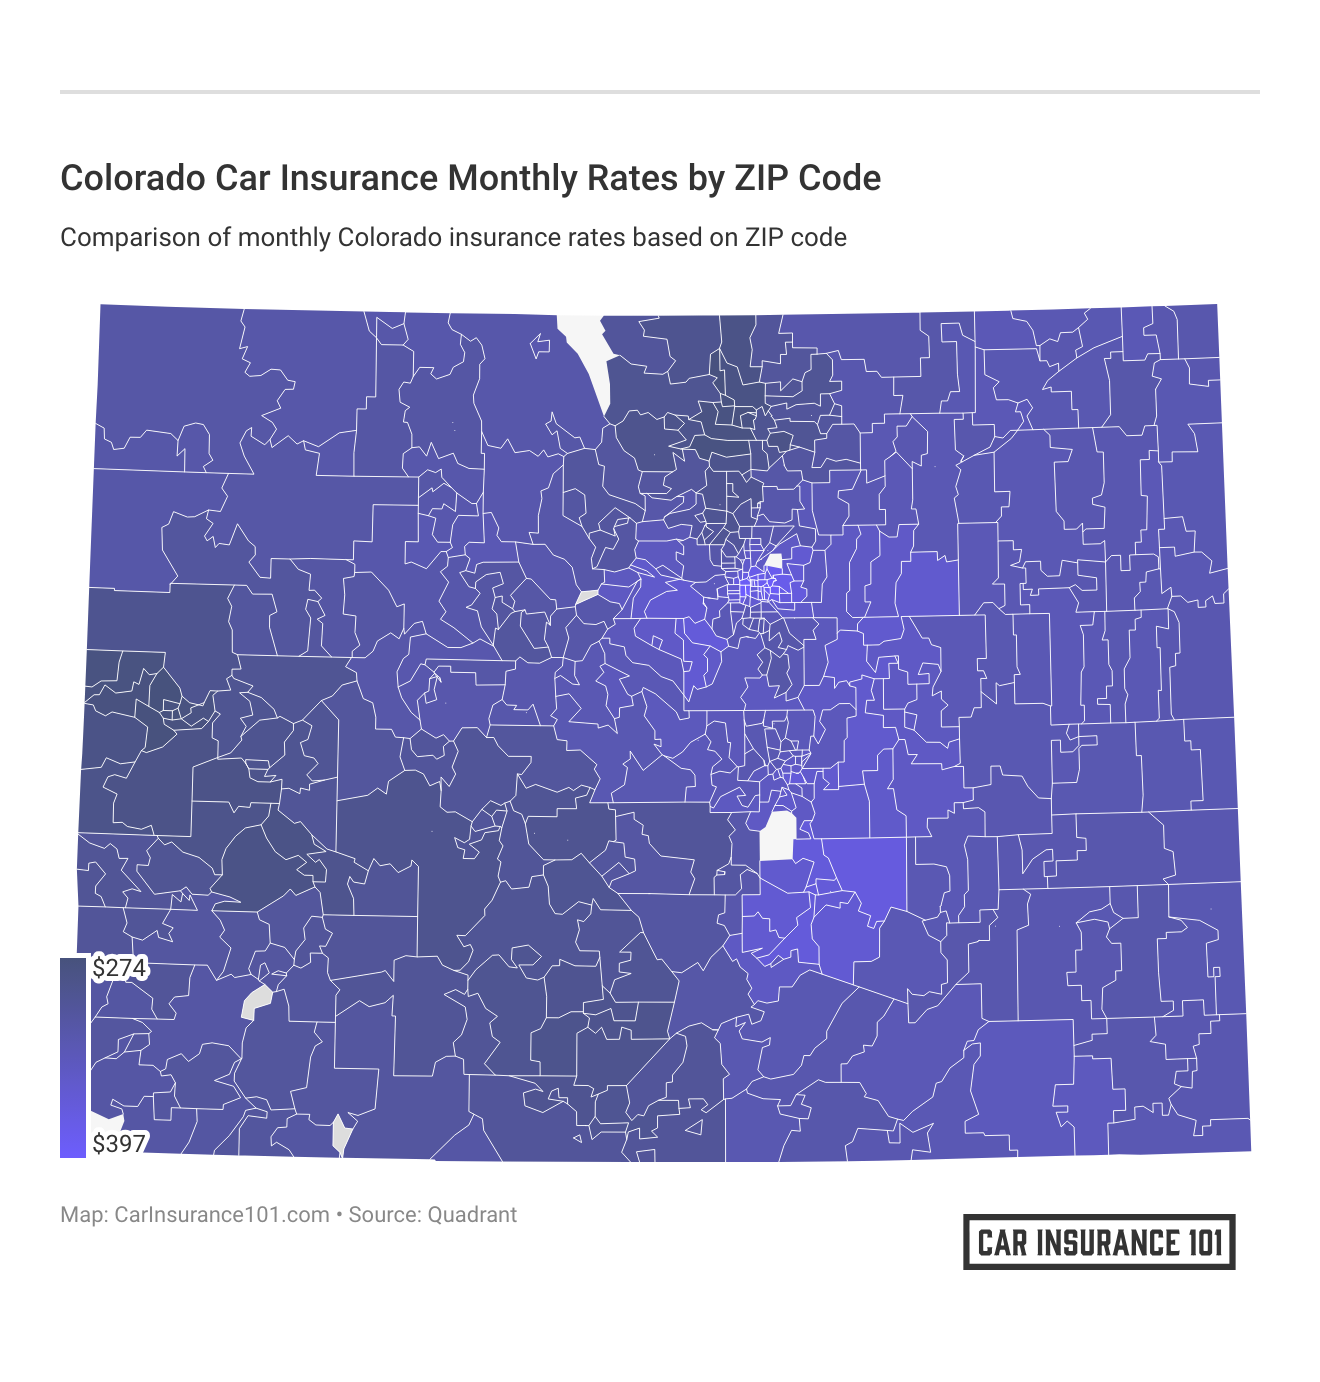 <h3>Colorado Car Insurance Monthly Rates by ZIP Code</h3>